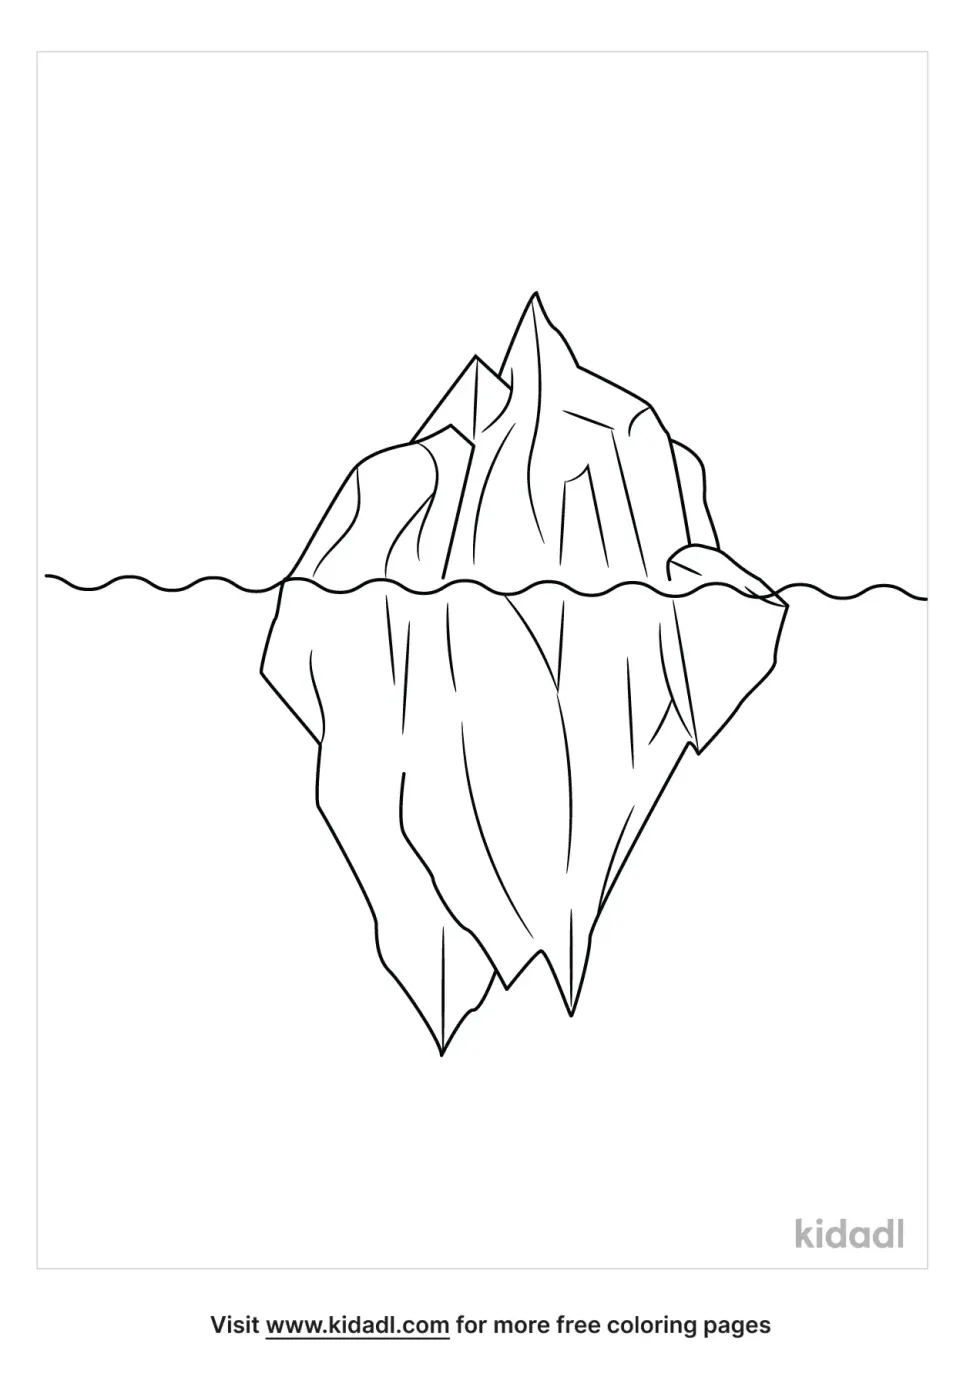 Iceberg Coloring Page